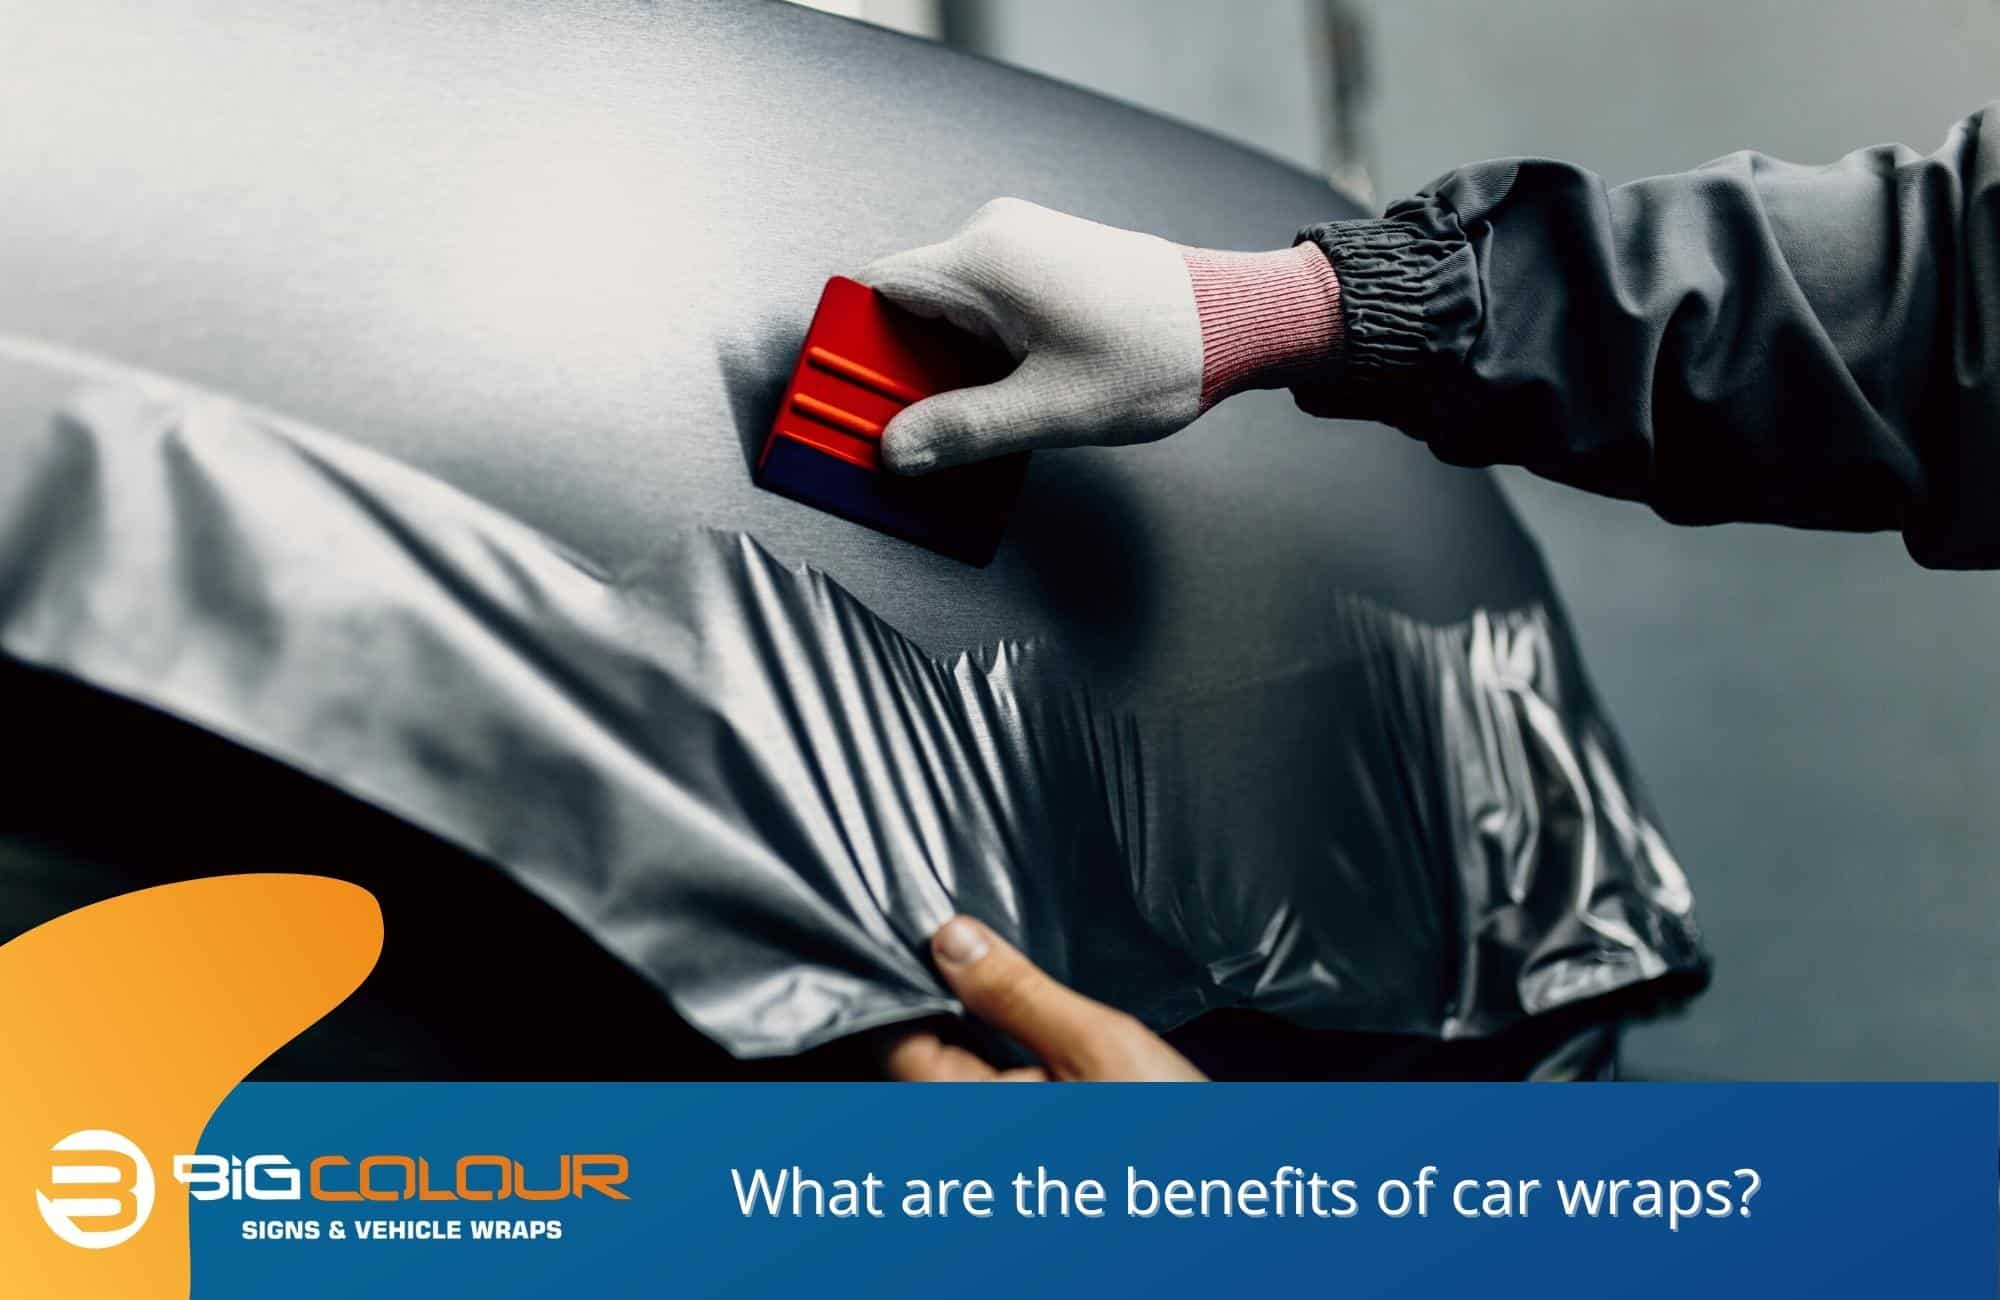 What are the benefits of car wraps